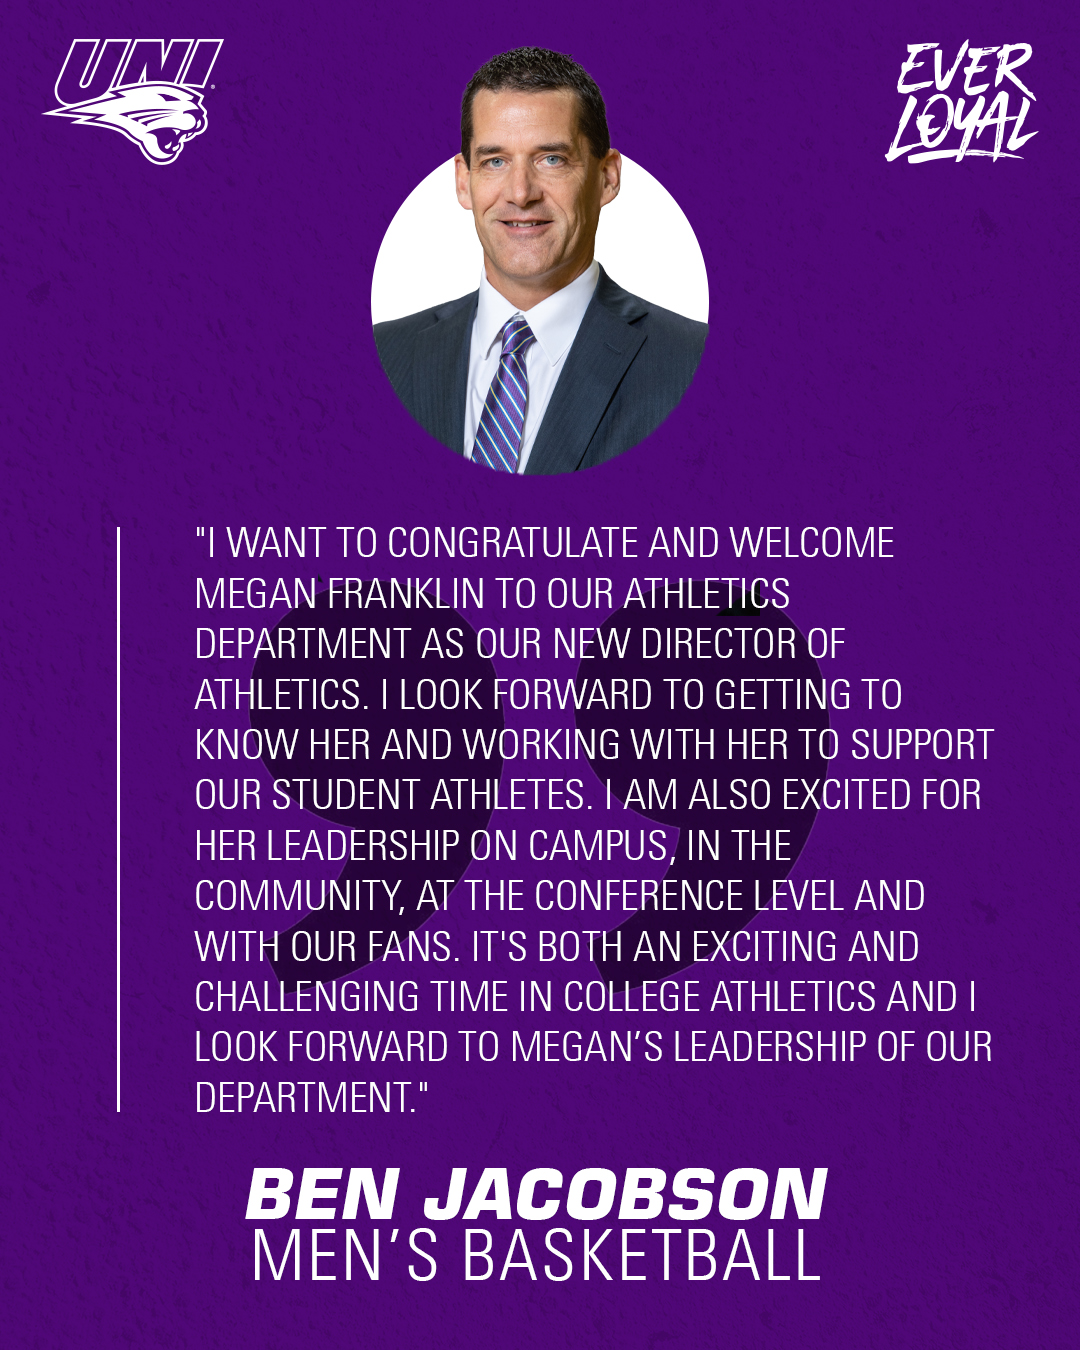 Ben Jacobson: "I want to congratulate and welcome Megan Franklin to our athletics department as our new Director of Athletics. I look forward to getting to know her and working with her to support our student athletes. I am also excited for her leadership on campus, in the community, at the conference level and with our fans. It's both an exciting and challenging time in college athletics and I look forward to Megan’s leadership of our department."